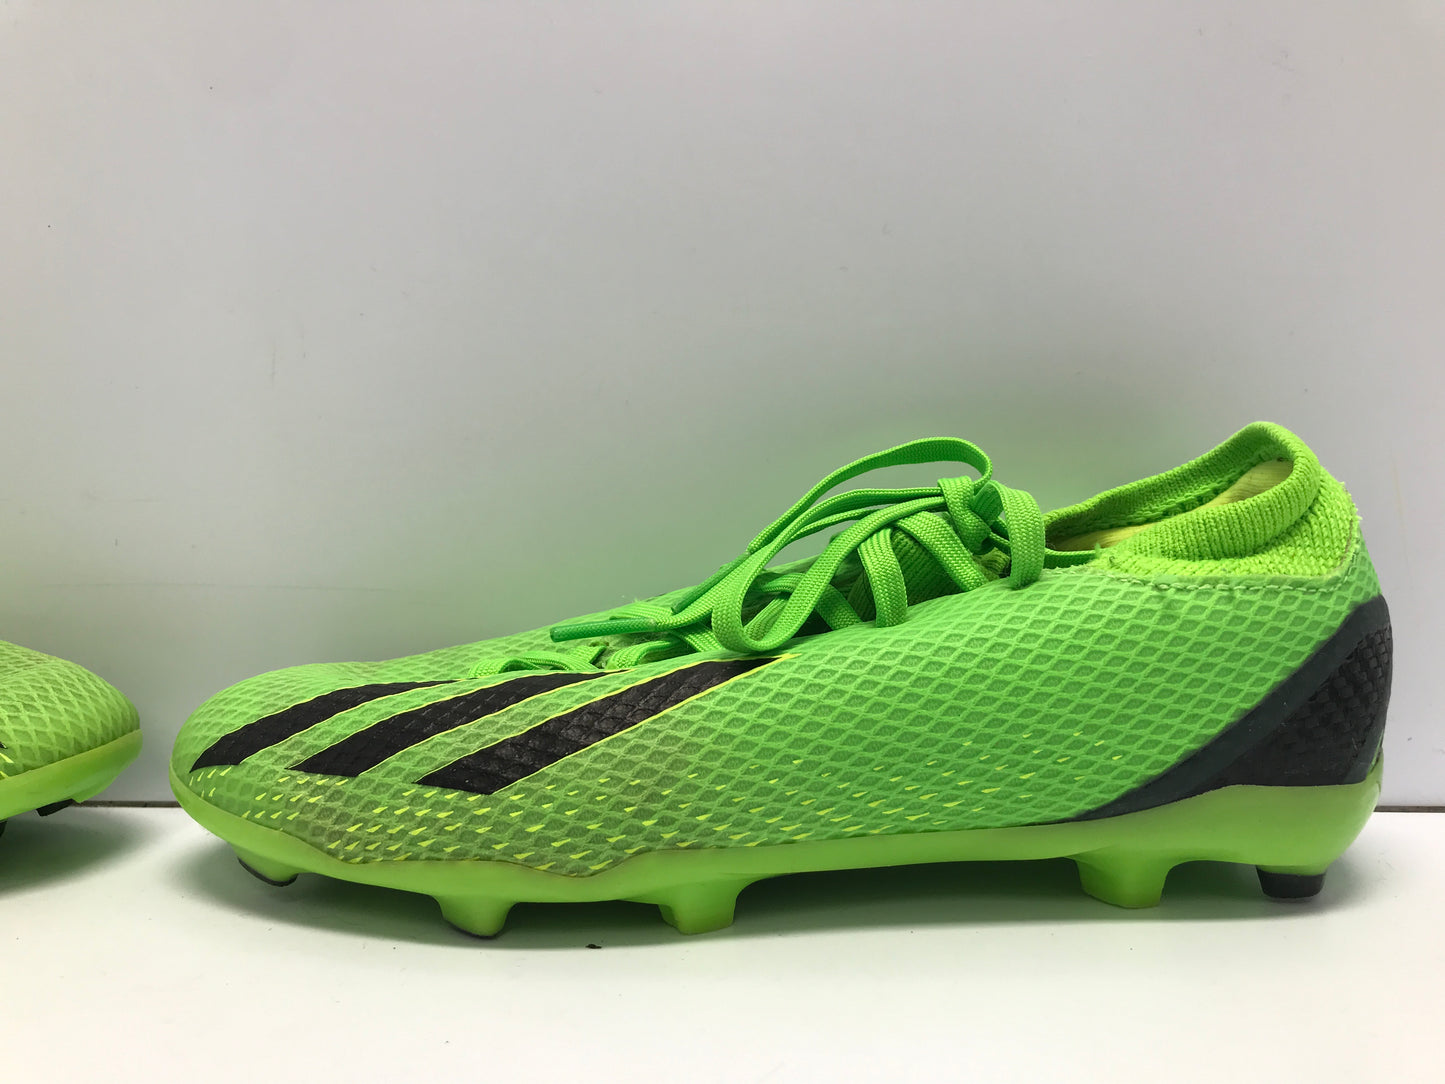 Soccer Shoes Cleats Child Size 3.5 Lime Black Slipper Foot Minor Marks